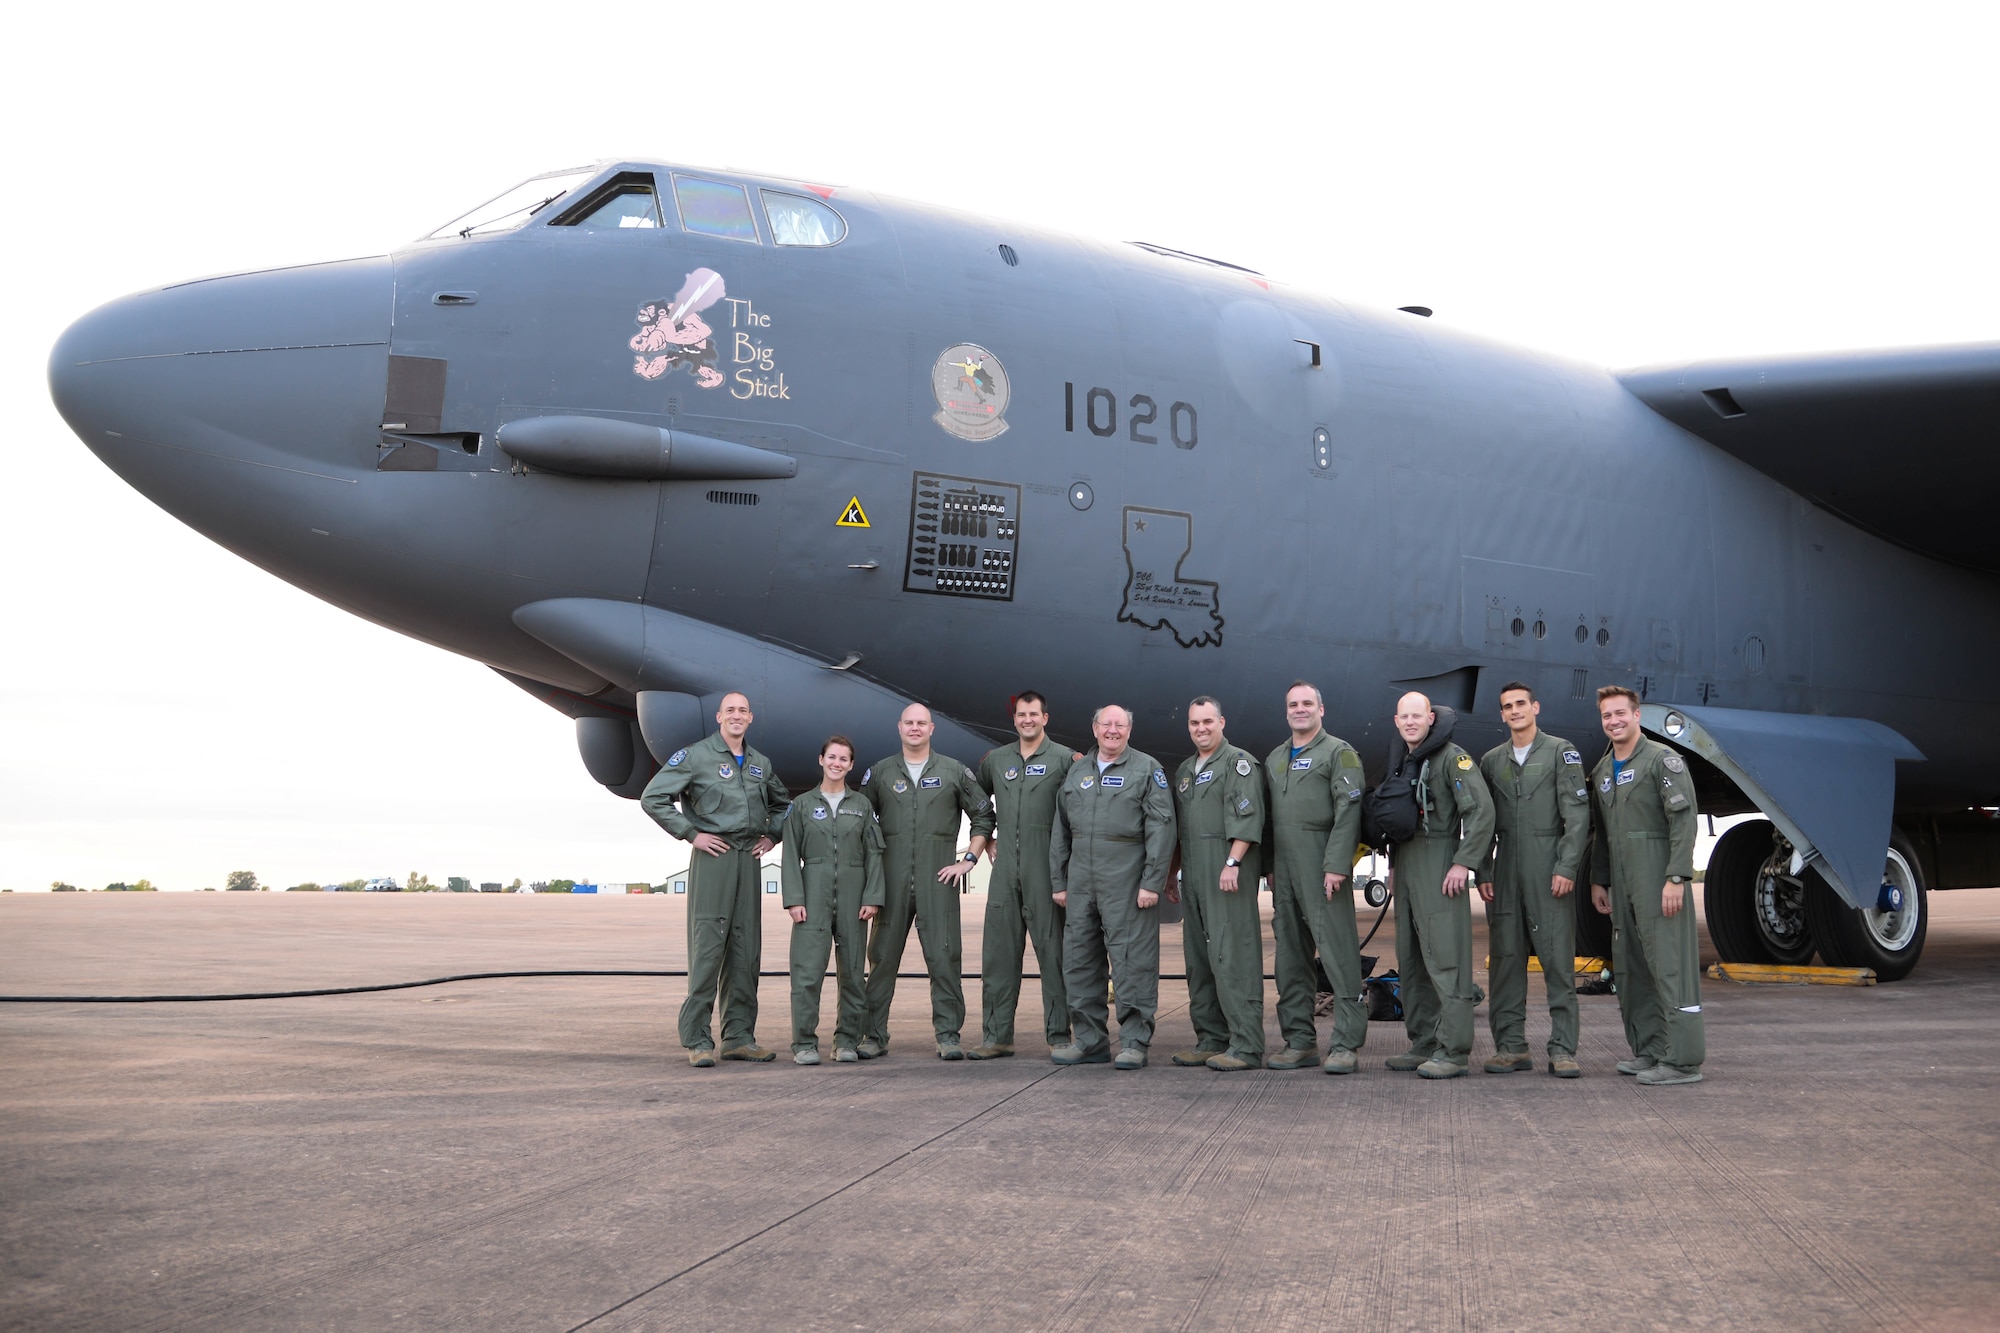 A B-52 Stratofortress aircrew poses for a photo after landing at Fairford Royal Air Force Base, Sept. 22, 2017.